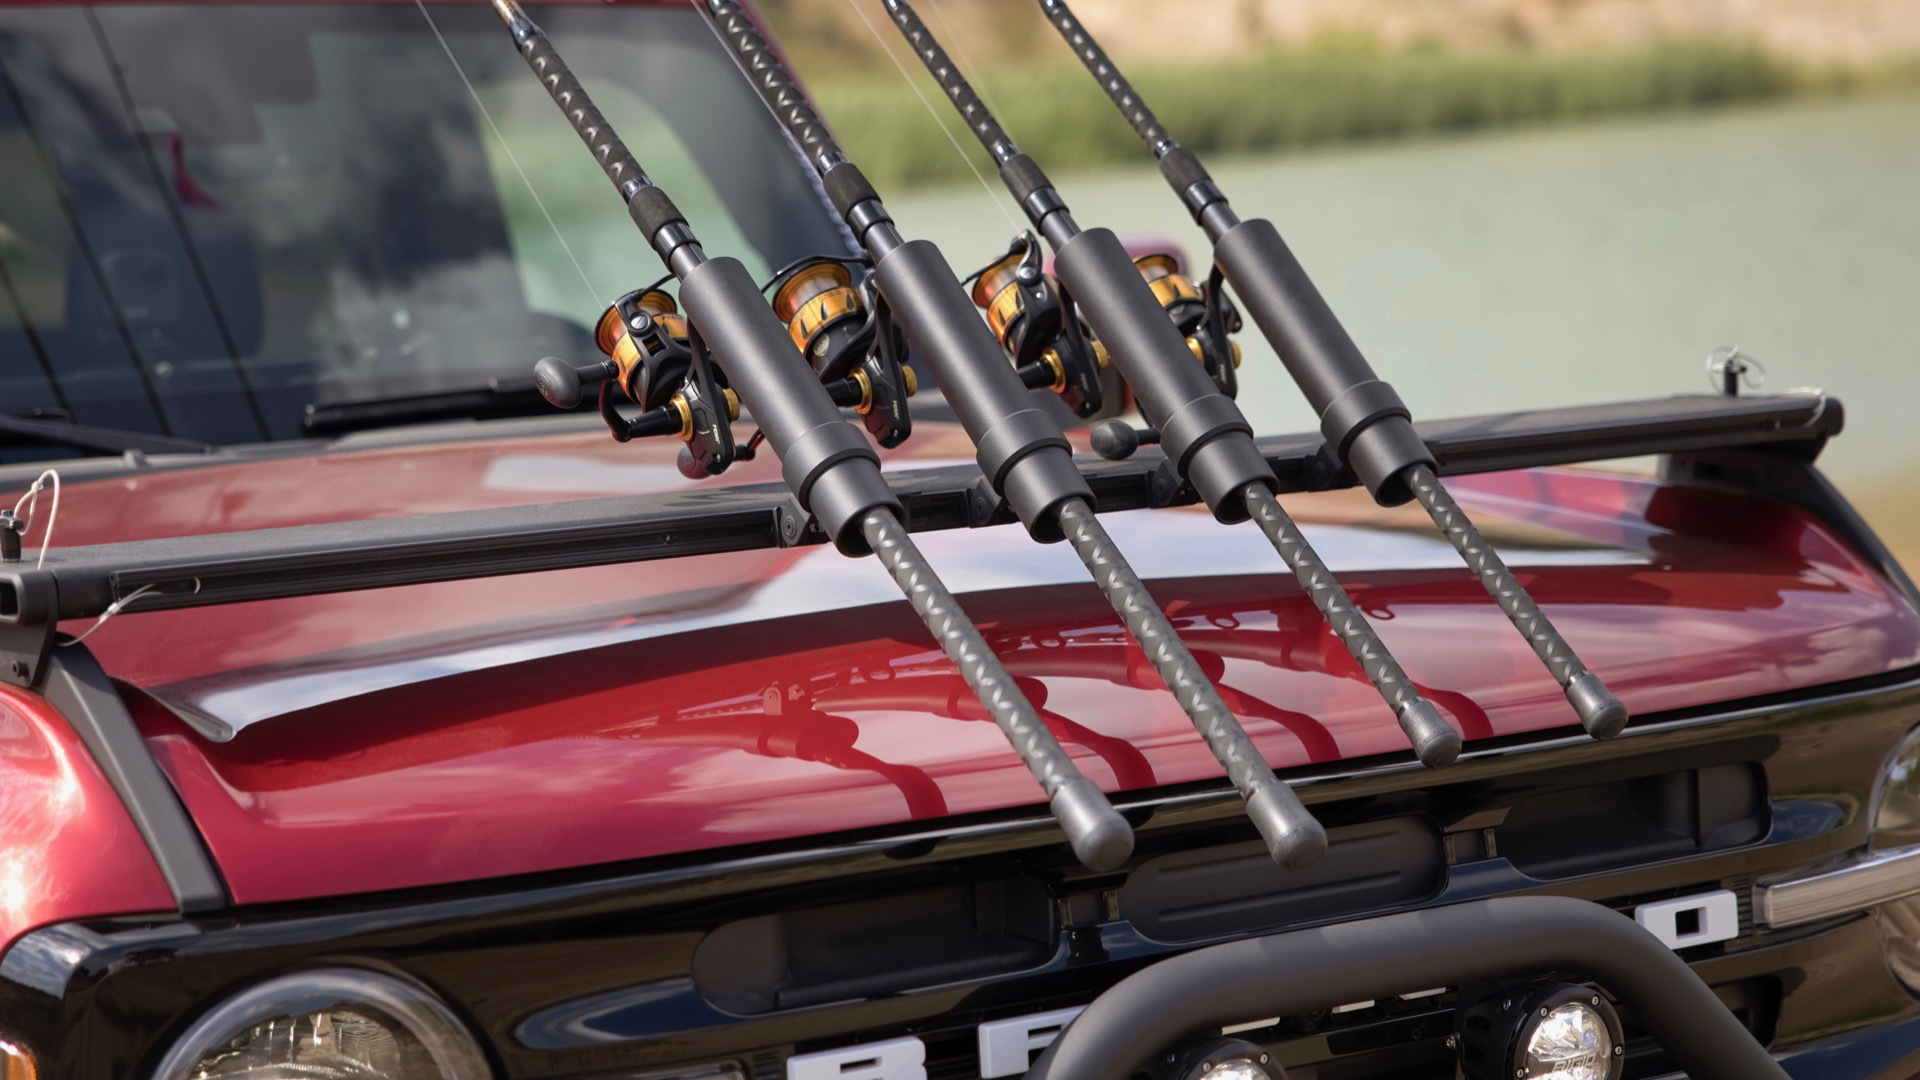 Ford Bronco Four-Door Outer Banks Fishing Guide concept